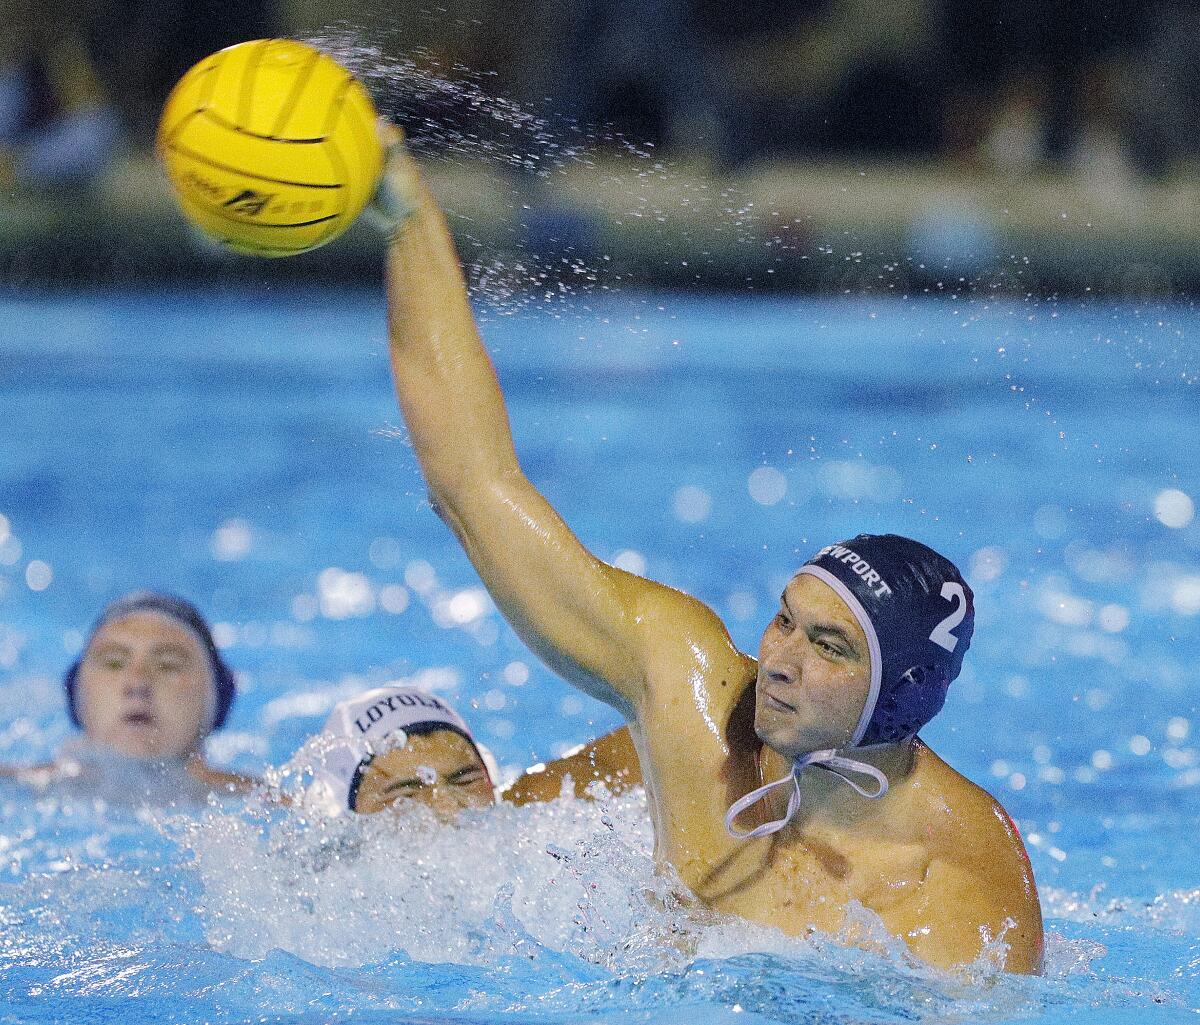 Newport Harbor's Makoto Kenney shoots and scores against Loyola in the second half of the CIF Southern Section Division 1 semifinal playoff match at Woollett Aquatics Center in Irvine on Wednesday.